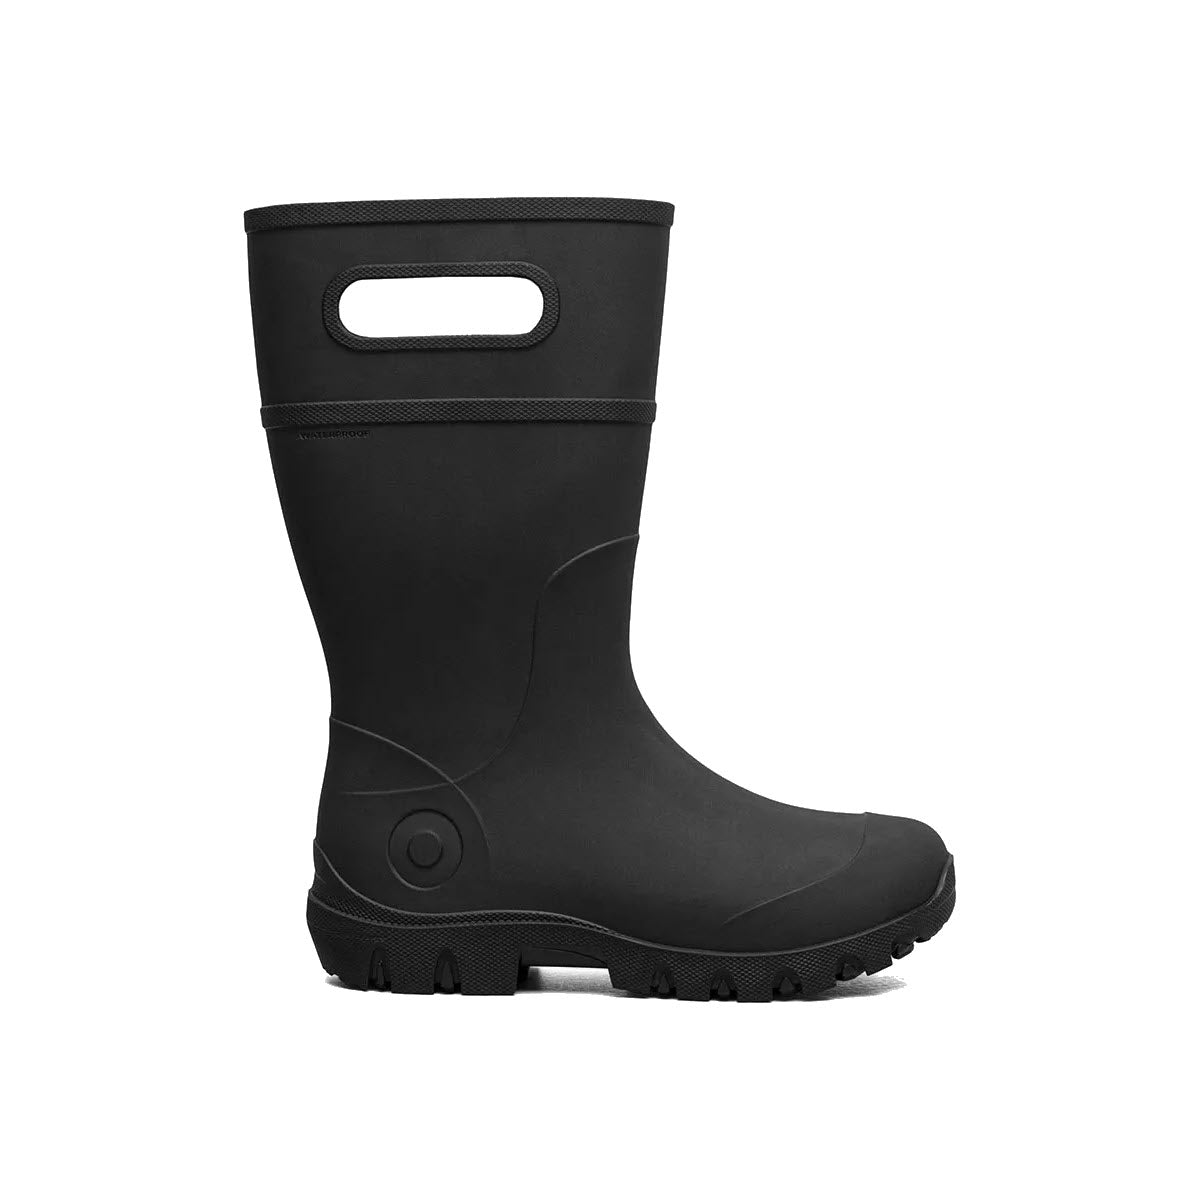 A black BOGS ESSENTIAL RAIN TALL BLACK - KIDS boot with a handle on the upper part and a rugged tread on the sole, isolated on a white background.